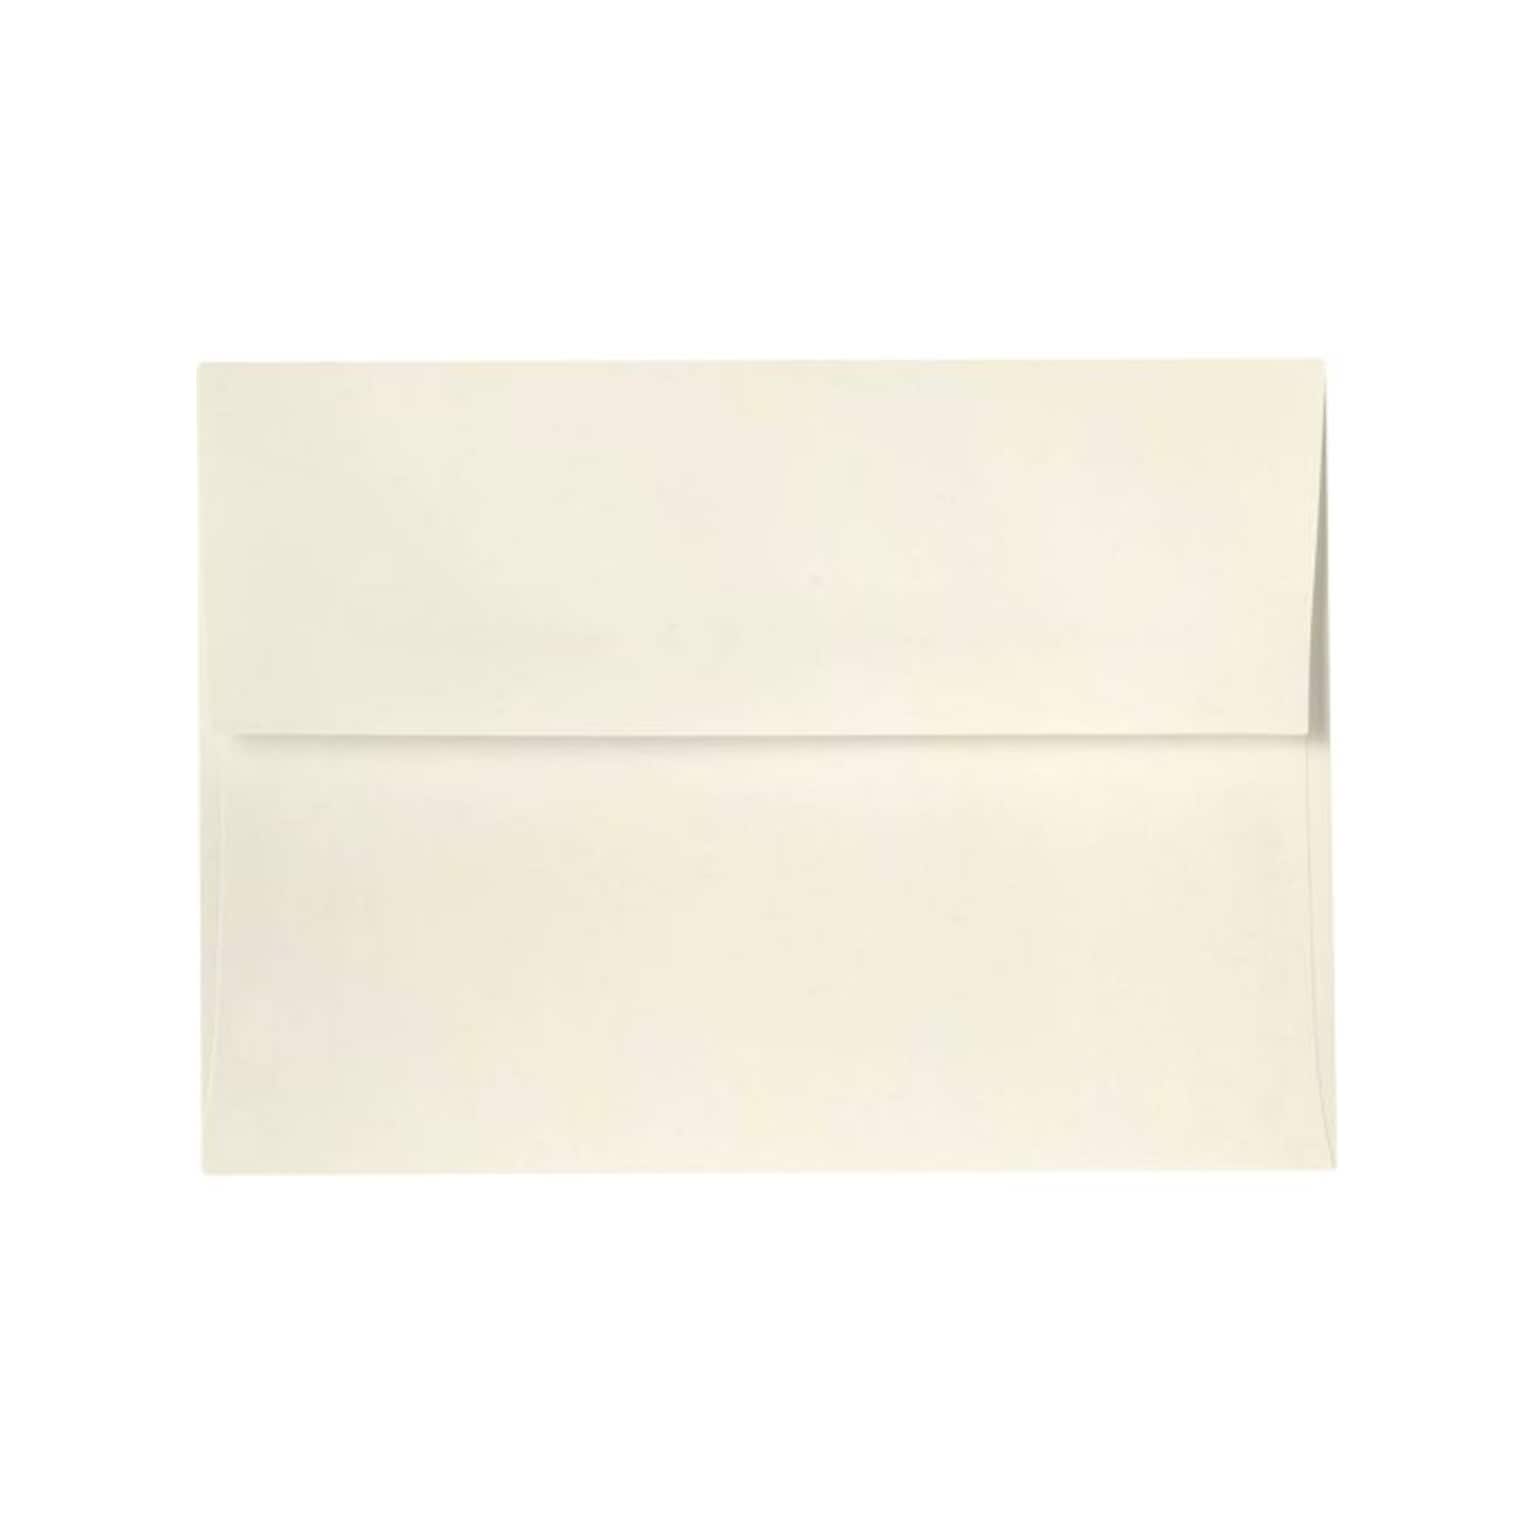 LUX A6 Invitation Envelopes (4 3/4 x 6 1/2) 50/Pack, Natural (5875-01-50)